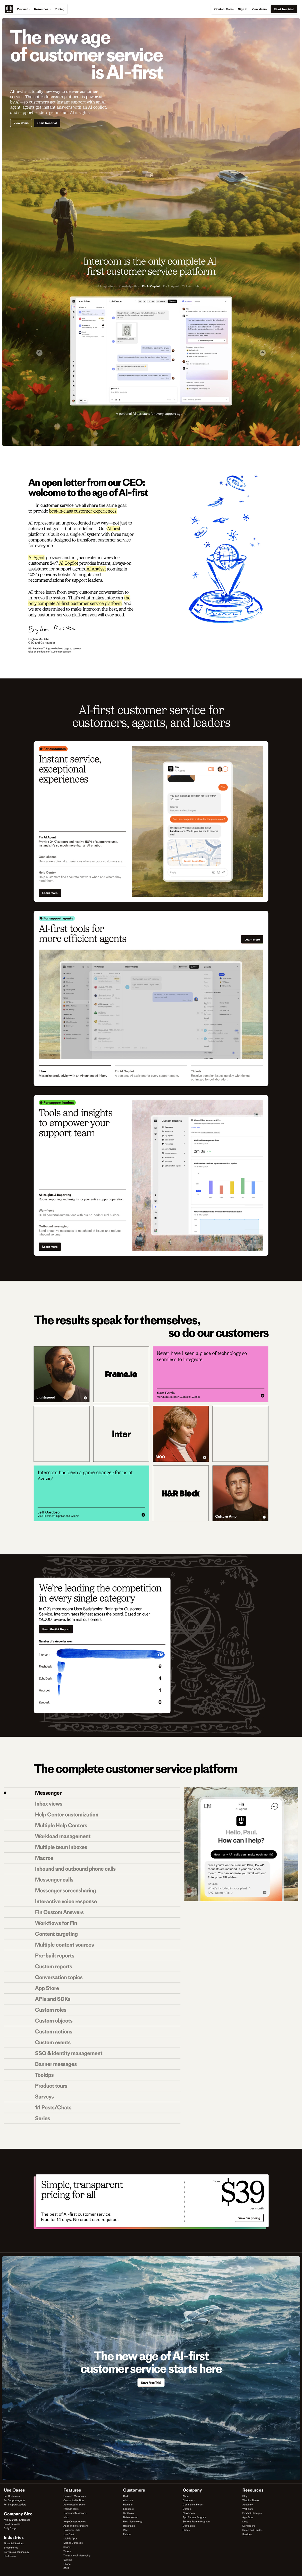 Intercom Landing Page Example: The new age of customer service is AI-first. AI-first is a totally new way to deliver customer service. The entire Intercom platform is powered by AI—so customers get instant support with an AI agent, agents get instant answers with an AI copilot, and support leaders get instant AI insights.